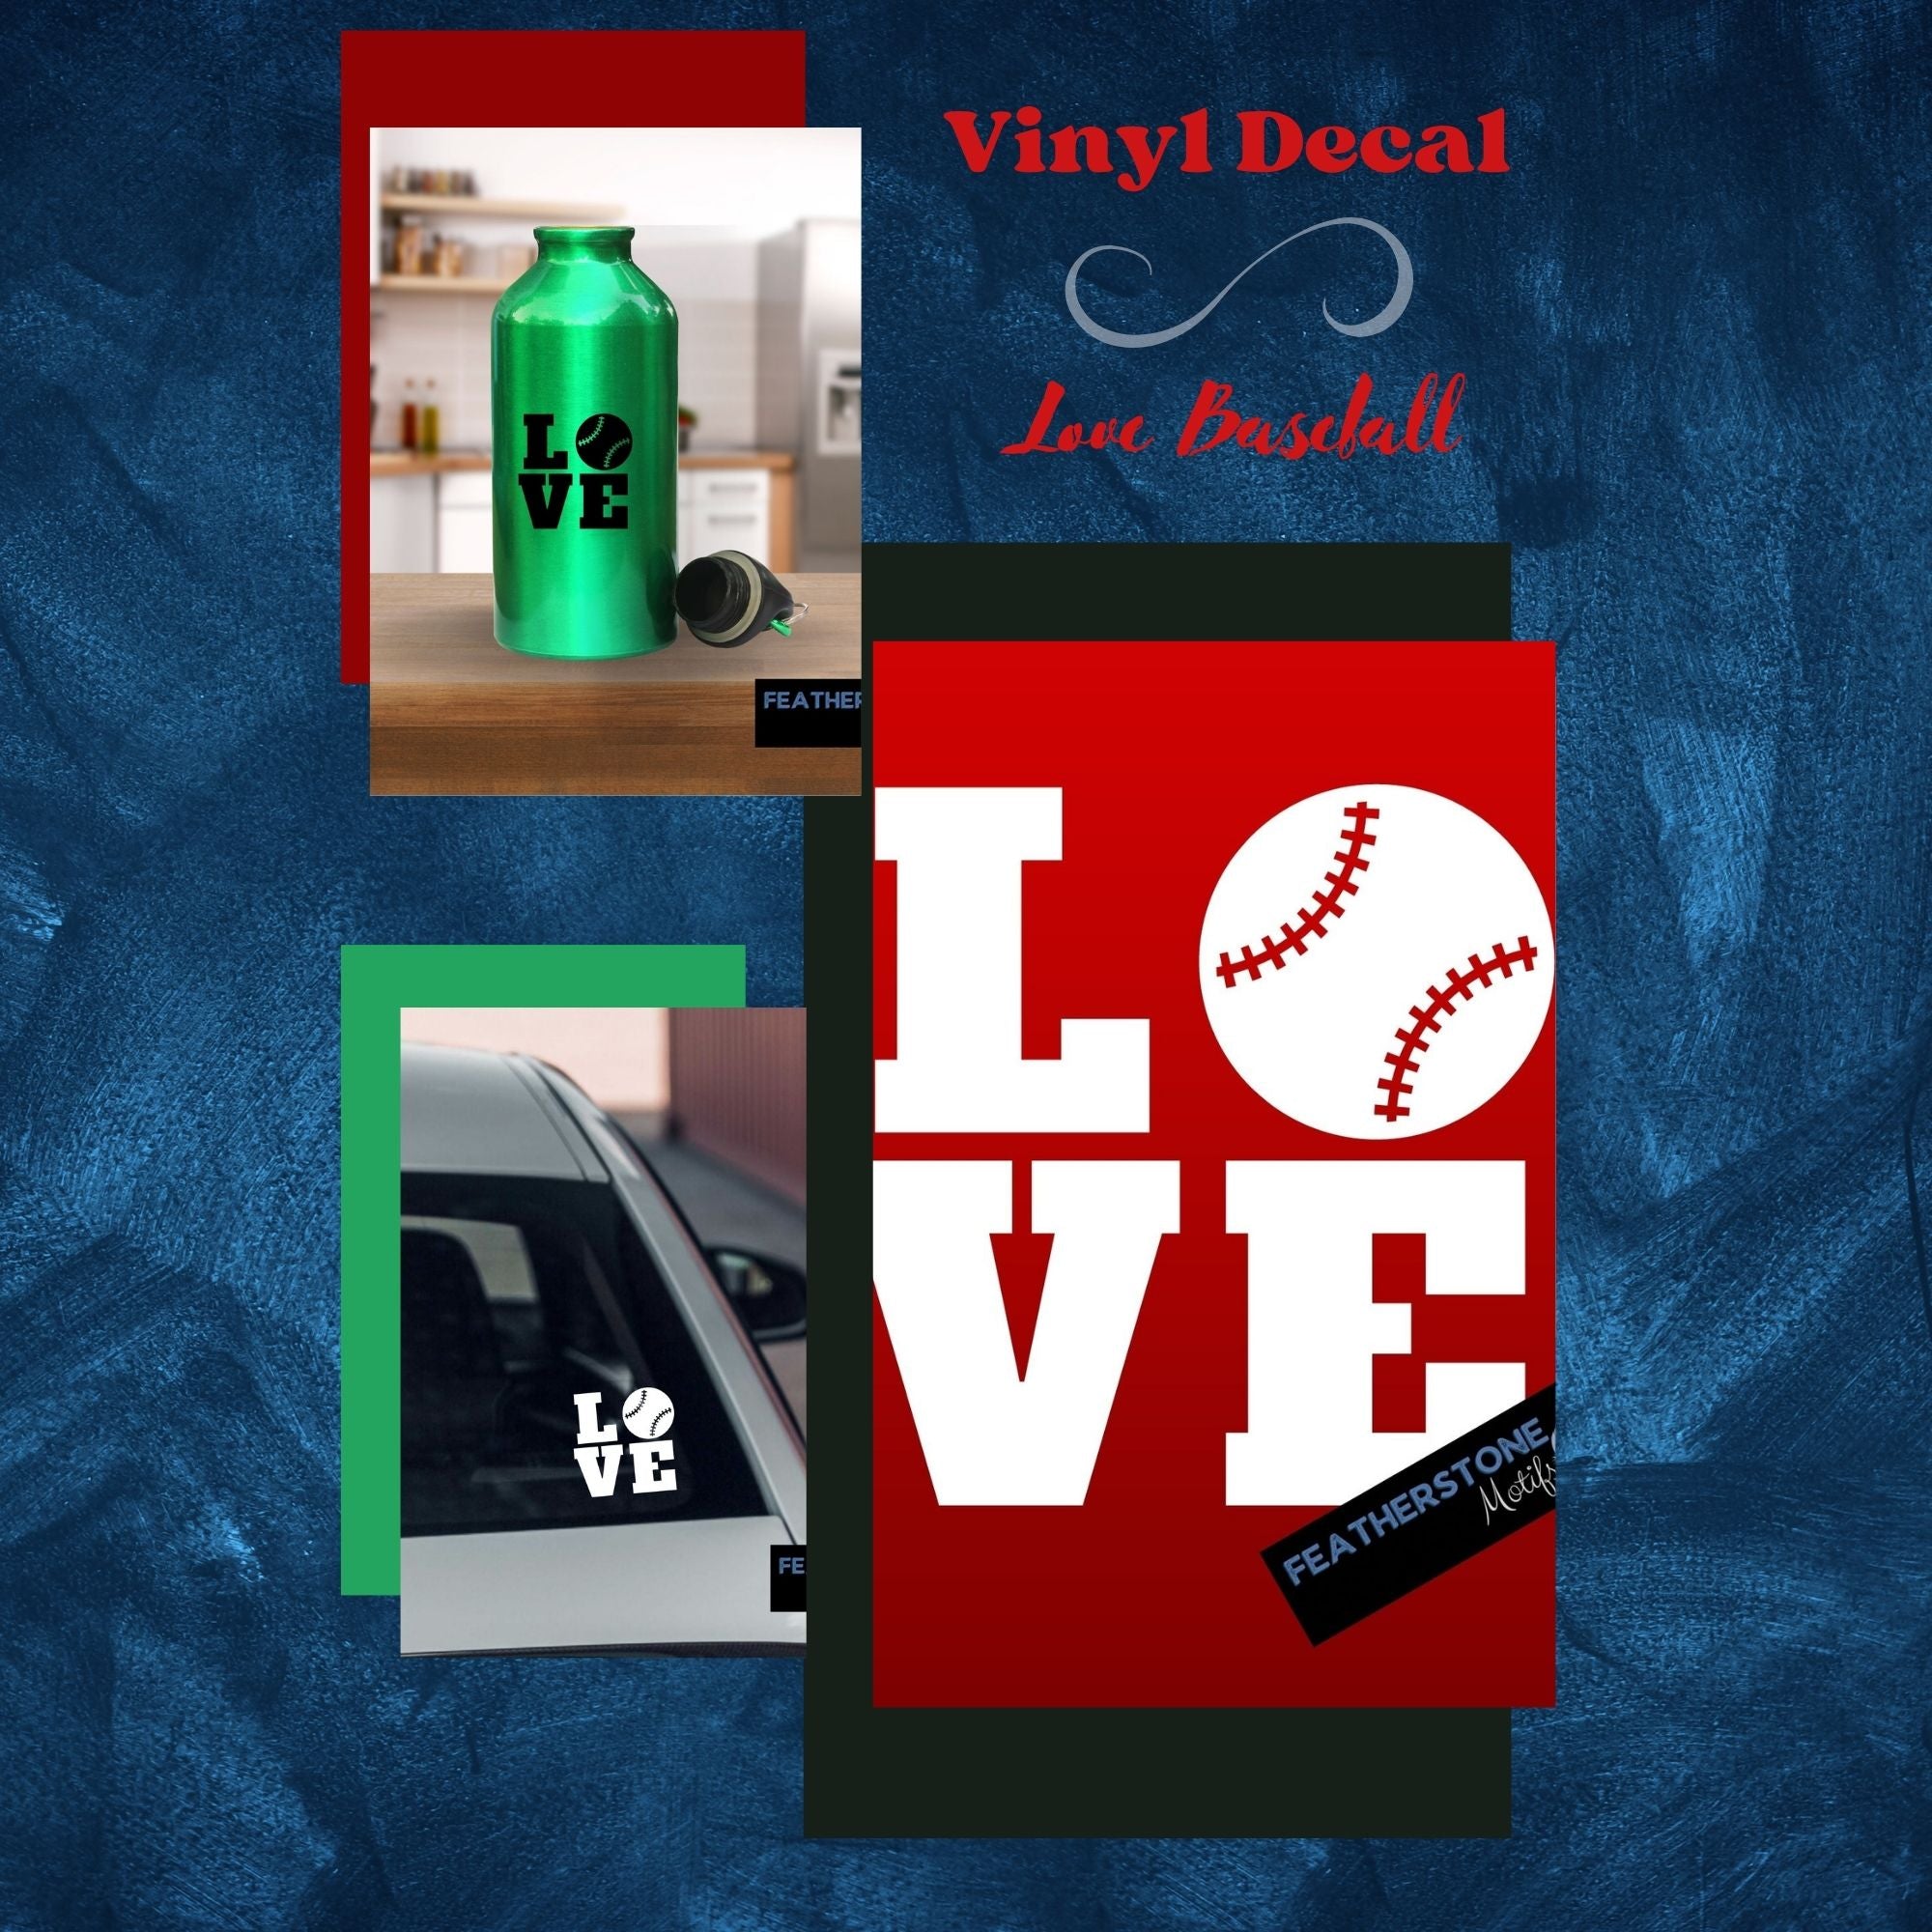 Love baseball? Then show it with this baseball love square vinyl decal! Available in 4 sizes and 10 colors, these vinyl decals make great gifts for everyone. This image shows the cover page.